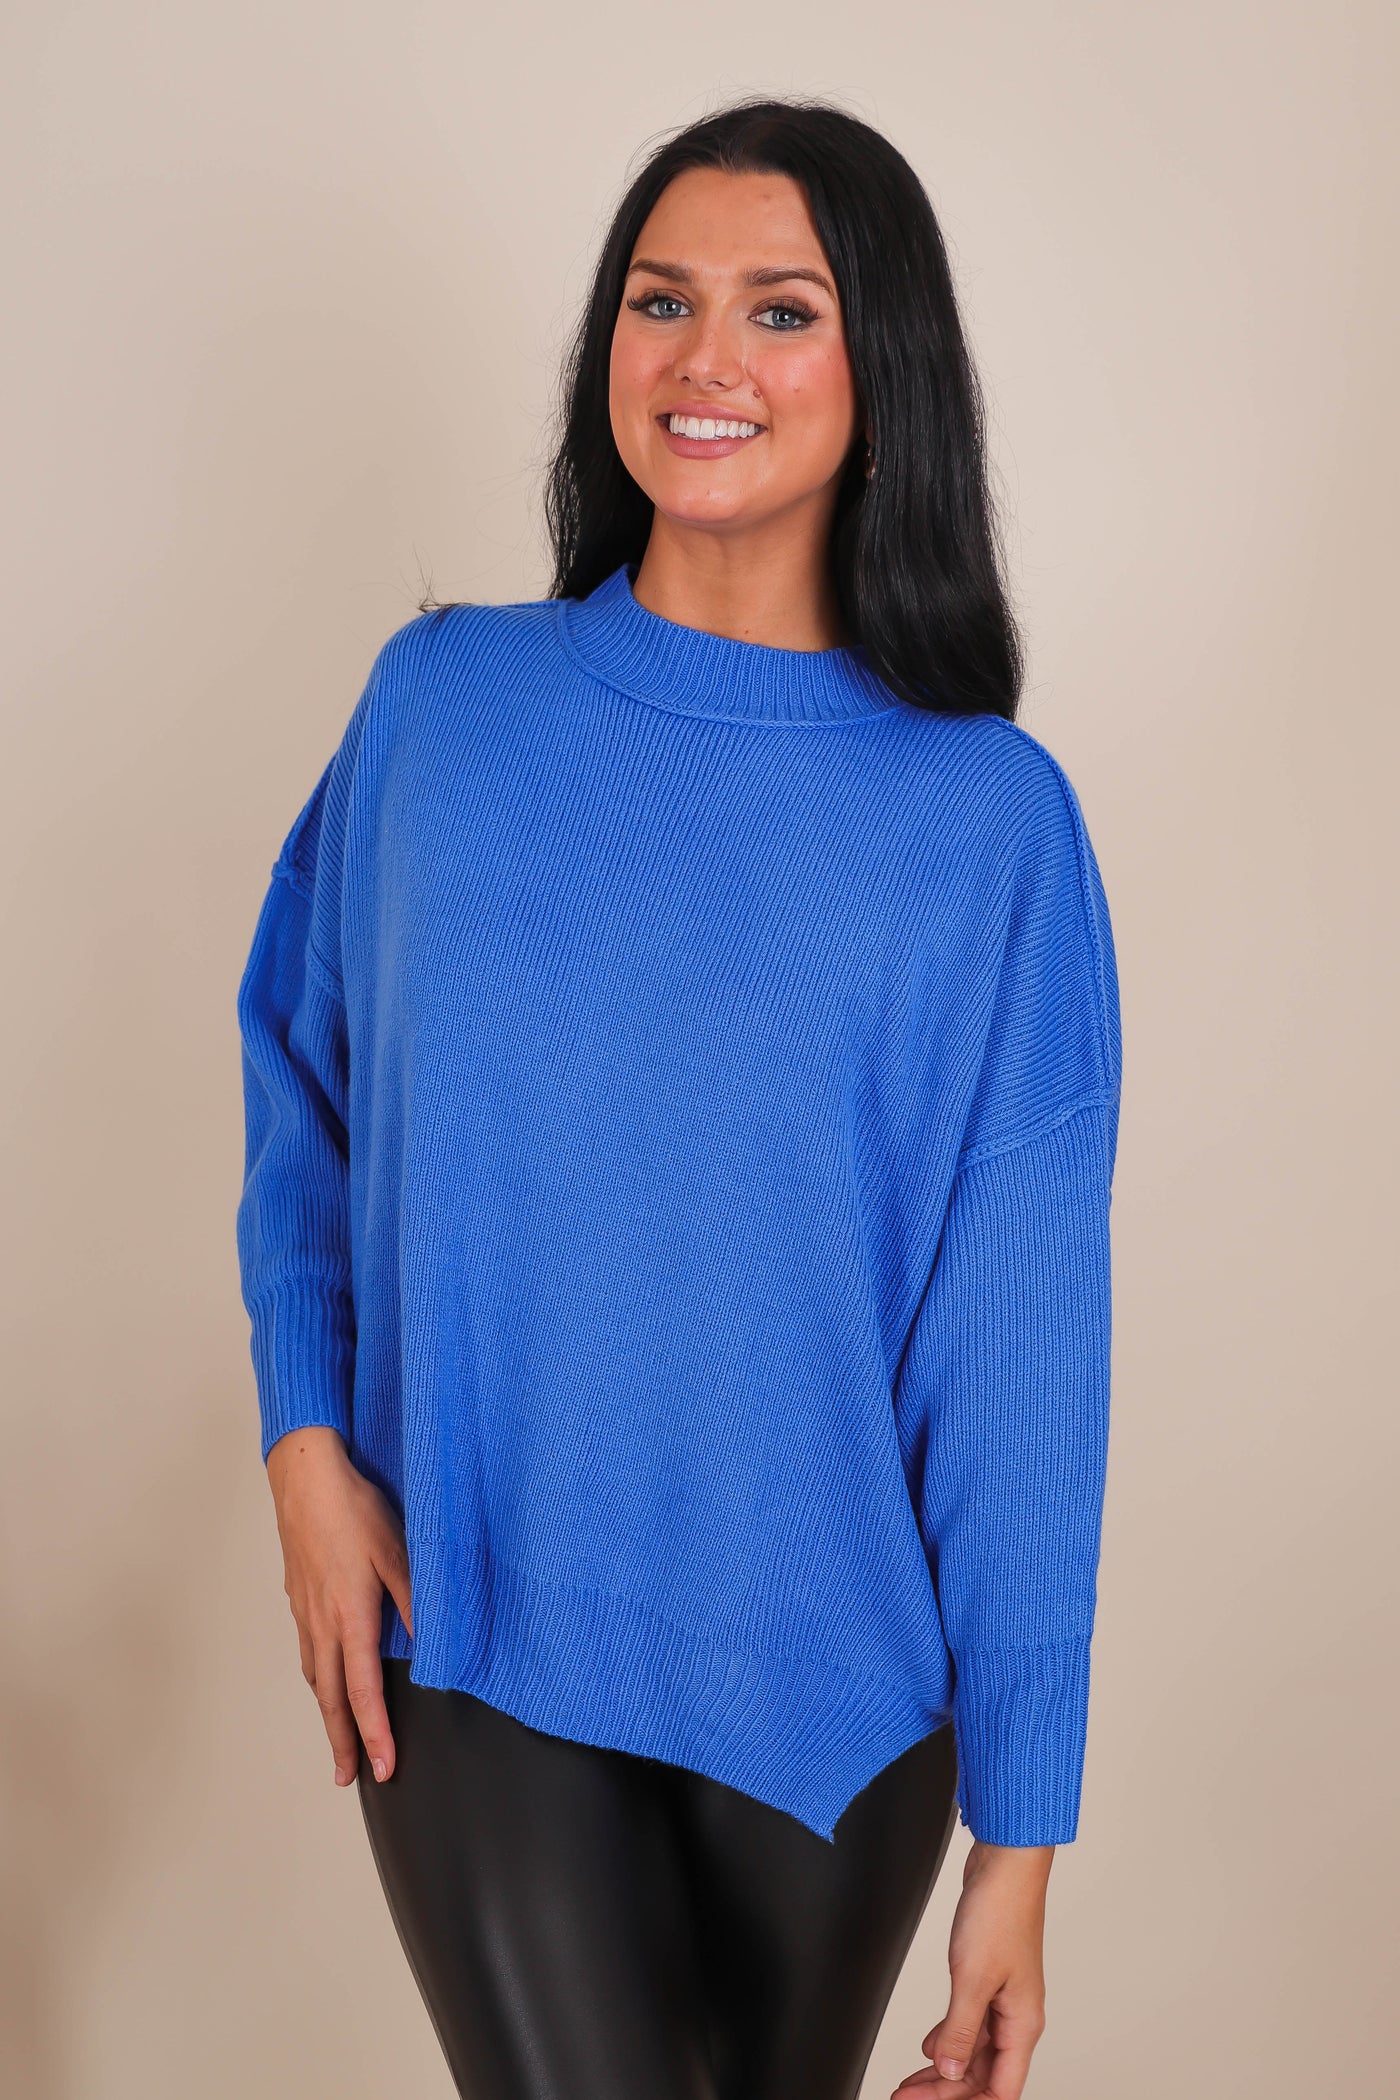 Women's Oversized Sweater- Bright Blue Sweater- Sweater For Leggings- Free People Sweater Dupe